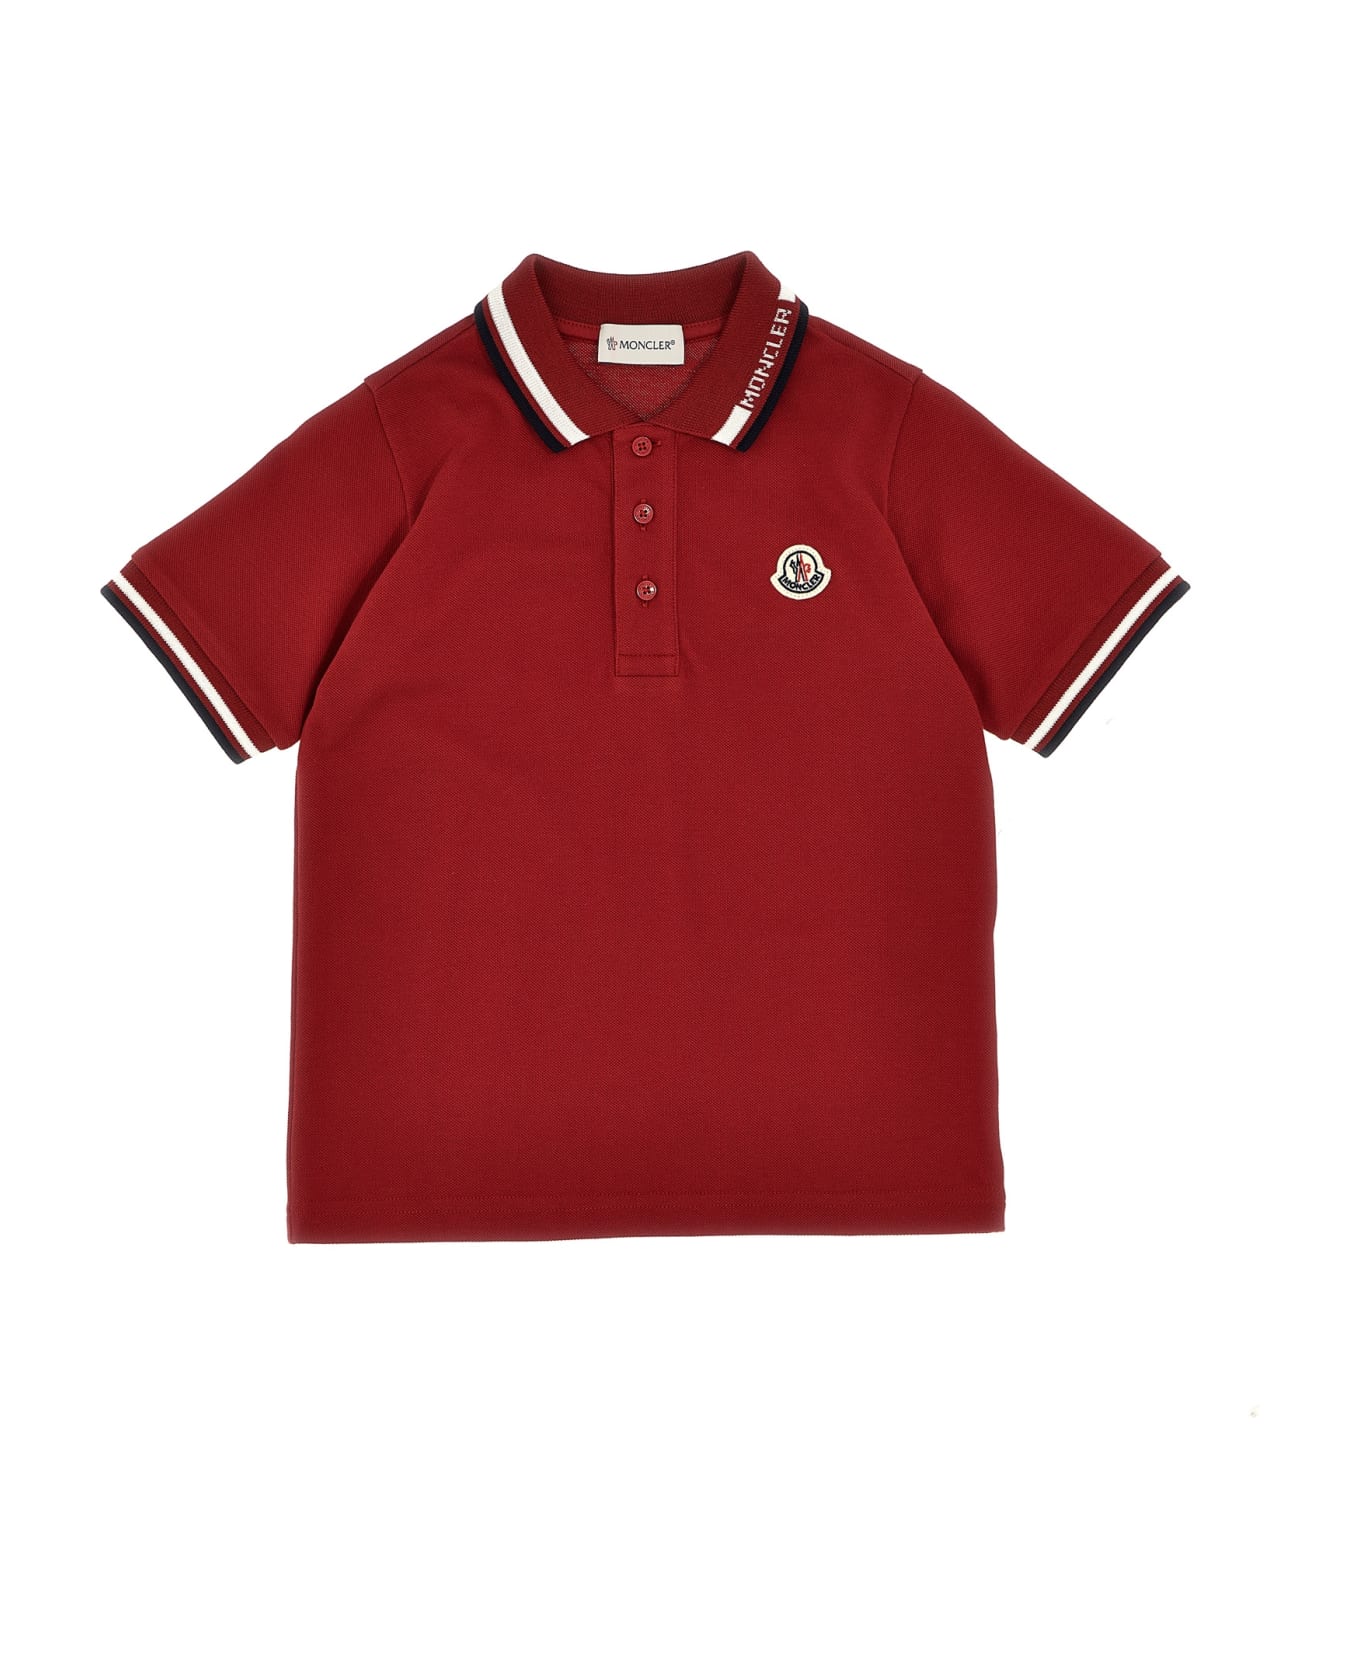 Moncler Logo Patch Polo Shirt - Red Tシャツ＆ポロシャツ